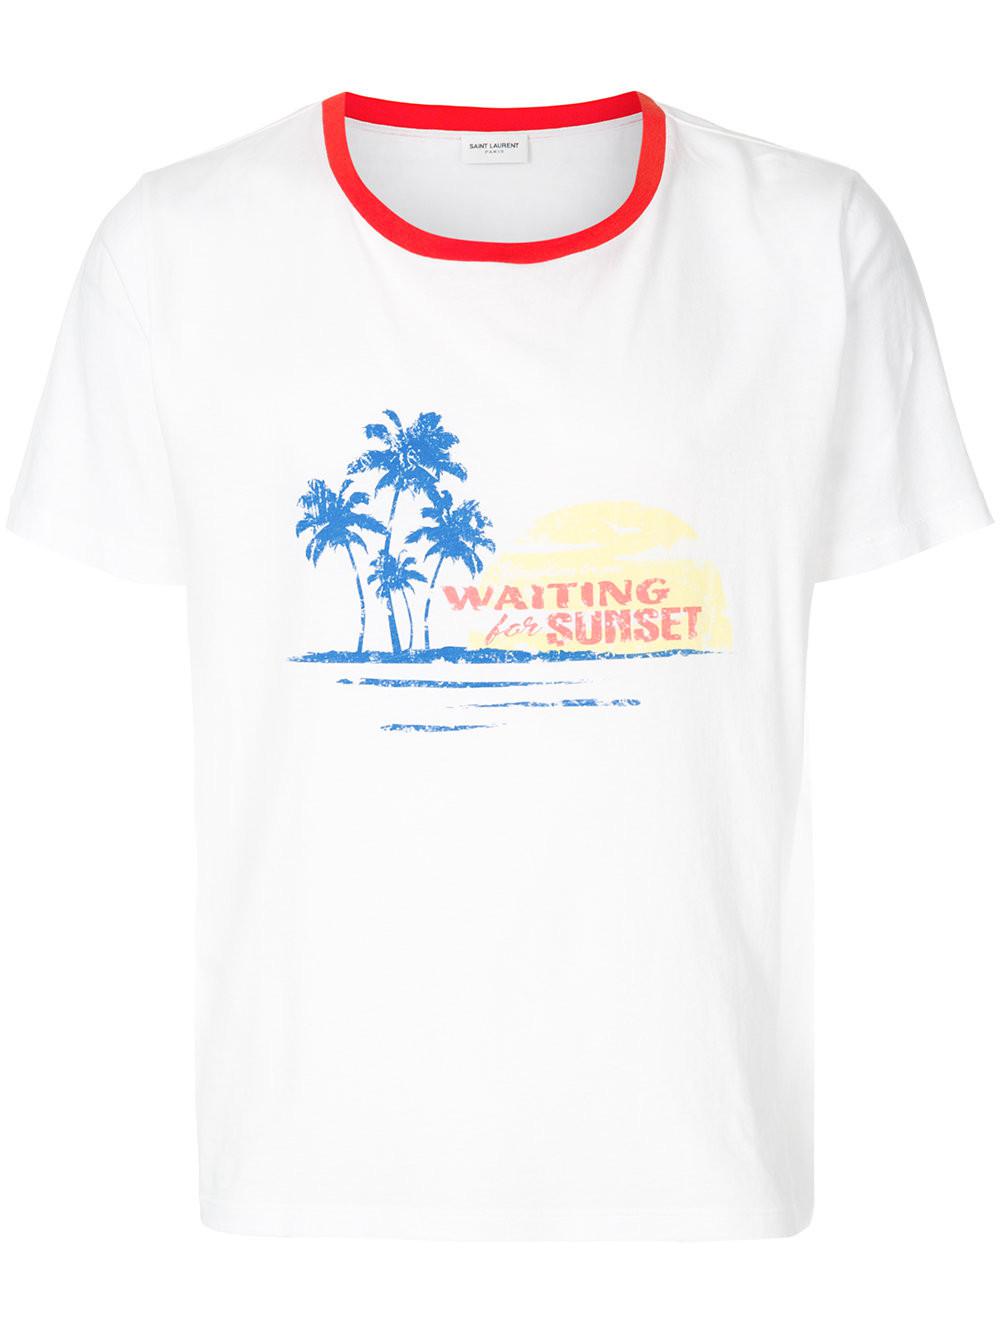 Saint Laurent Cotton Waiting For Sunset T-shirt in White/Red 